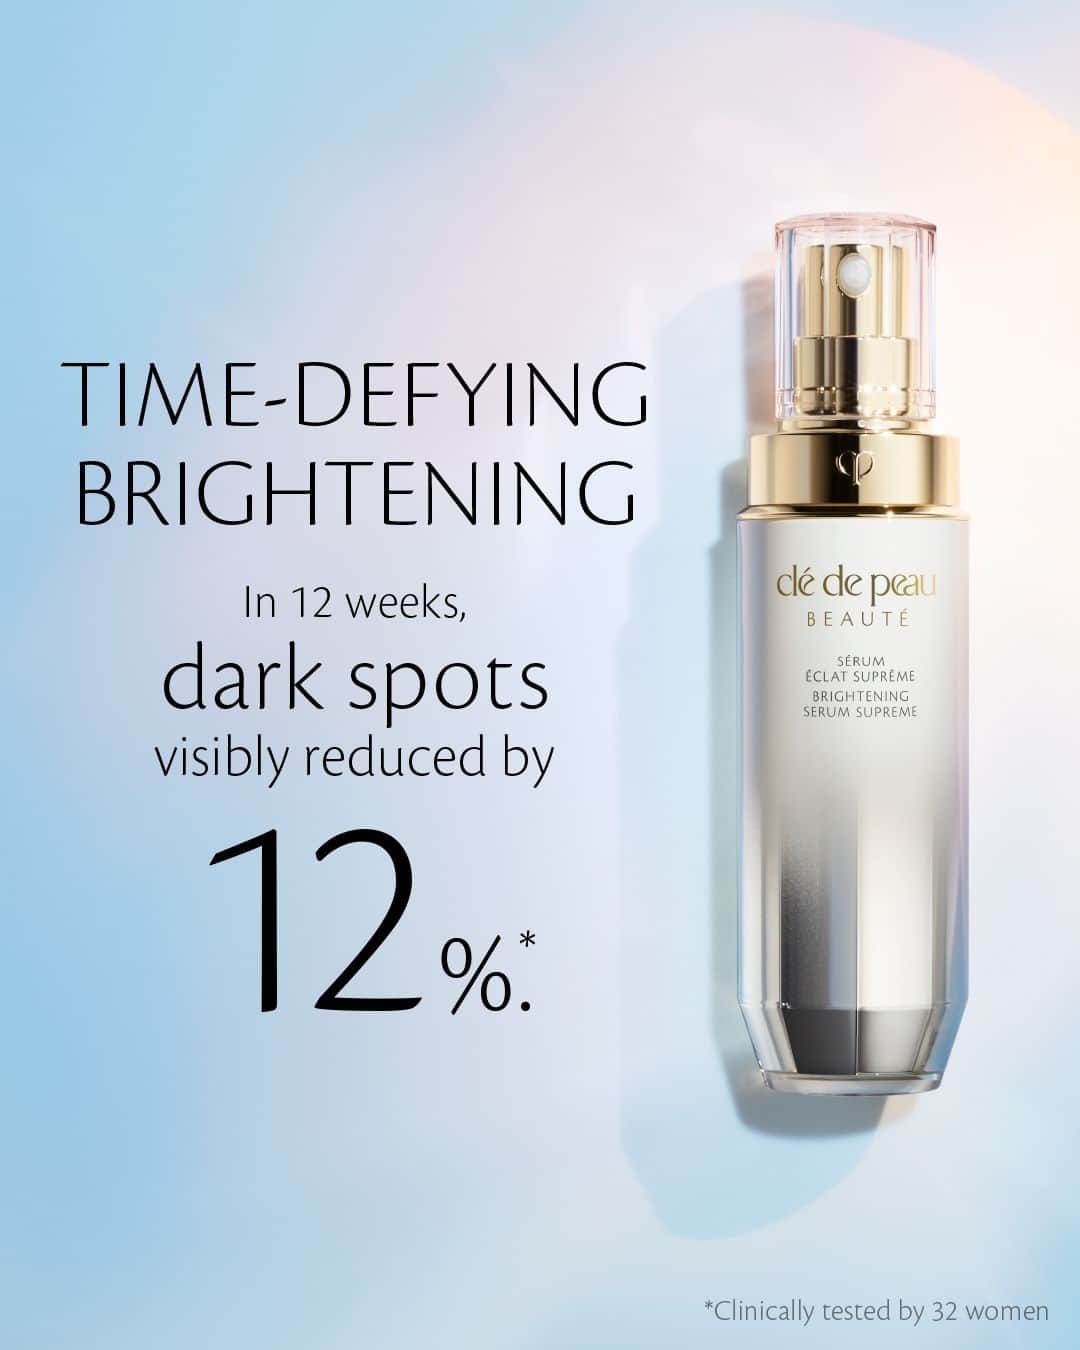 Clé de Peau Beauté Officialさんのインスタグラム写真 - (Clé de Peau Beauté OfficialInstagram)「With our #BrighteningSupremeSeries, you can glow with confidence at any age. Designed to brighten skin and enhance your youthful radiance, this series includes our #BrighteningSerumSupreme, packed with the potent ingredient 4MSK to reduce the appearance of dark spots, as well as the #BrighteningMaskTreatmentSupreme, a two-step treatment that brings out your skin’s natural iridescence.   年齢にとらわれない自分らしい生き方やライフスタイル（エイジングデザイン）をクレ・ド・ポー ボーテ エイジングデザインシリーズがサポートします。  〇クレ・ド・ポー ボーテ #セラムエクラＳ （医薬部外品） 美白有効成分*、アクティブ4MSK（4-メトキシサリチル酸カリウム塩）を配合し、効果的にメラニンの生成を抑え、シミ・そばかすを防ぎます。 〇クレ・ド・ポー ボーテ #ソワンマスクエクラＳ 贅沢な輝きをまとった温感ジェル洗顔料エクスフォリアンエクラＳで 肌をほぐすように汚れや不要な角層を取り除くことで、マスクエクラＳ（医薬部外品）に贅沢に含まれたうるおいや美白有効成分の肌への浸透**をサポートします。  *美白とは、メラニンの生成を抑え、シミ・そばかすを防ぐことです。 **角層まで」8月21日 13時00分 - cledepeaubeaute